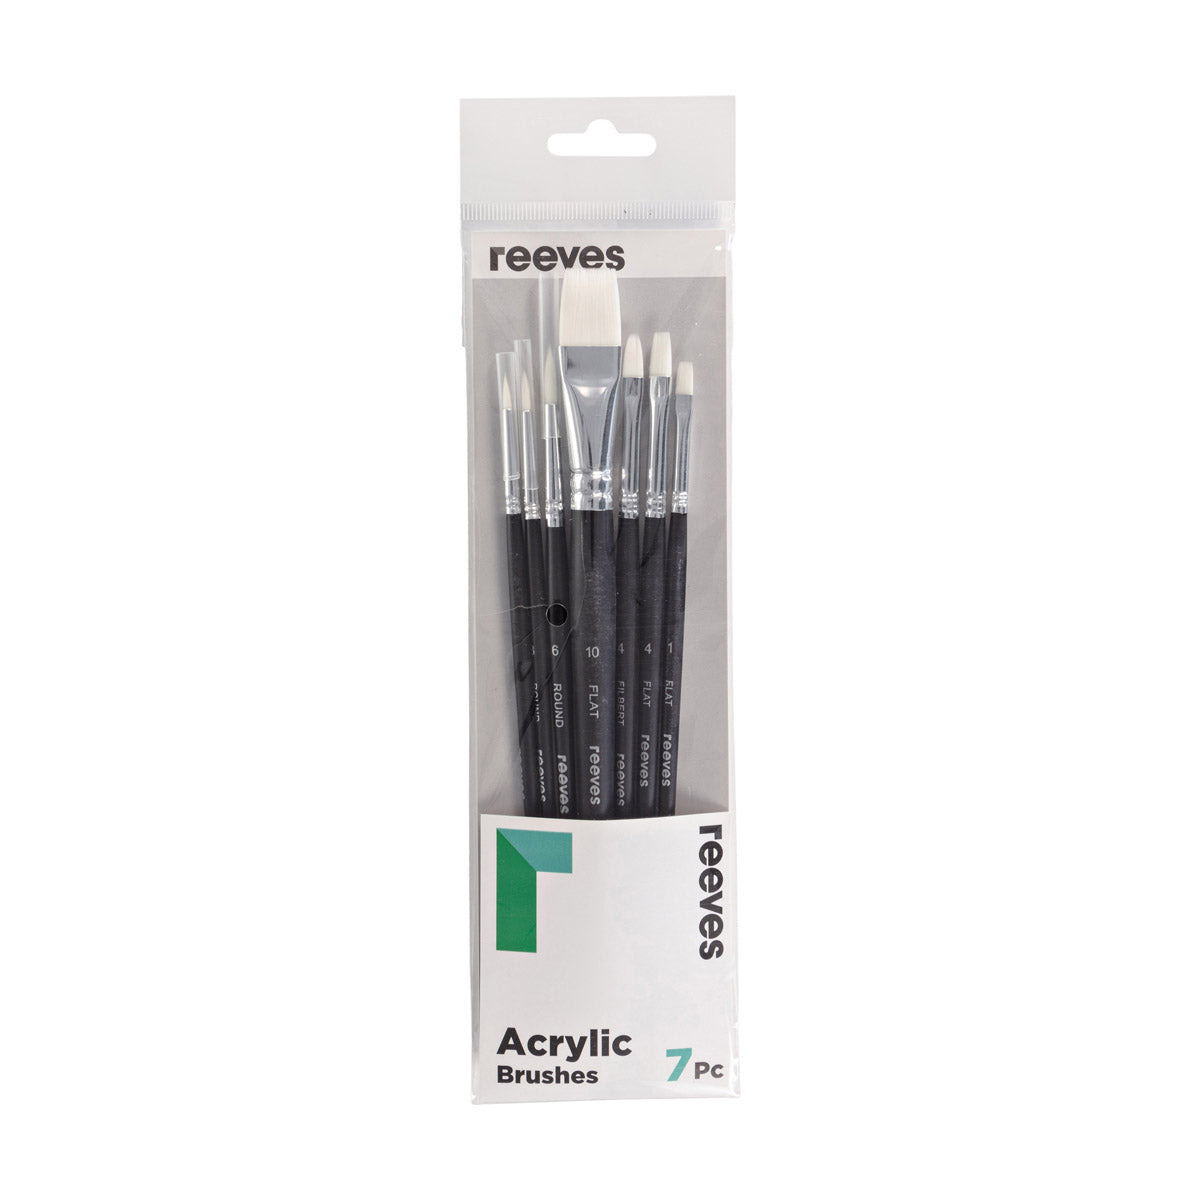 Reeves - Acrylpinsel -Set - kurzer Griff - 7x Pinselpack